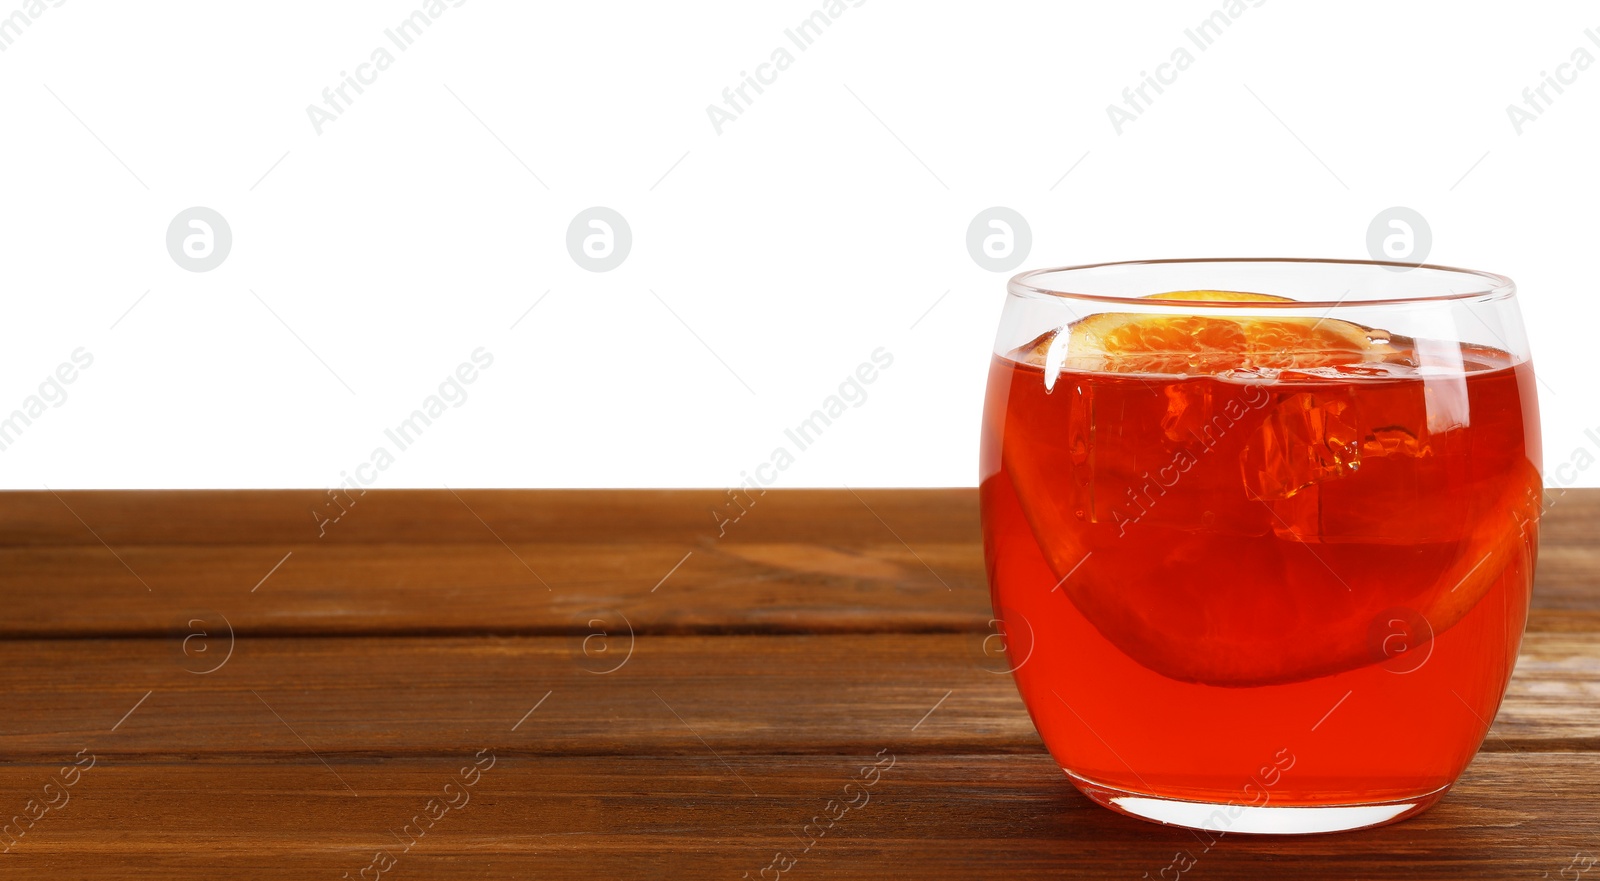 Photo of Aperol spritz cocktail and orange slices in glass on wooden table against white background